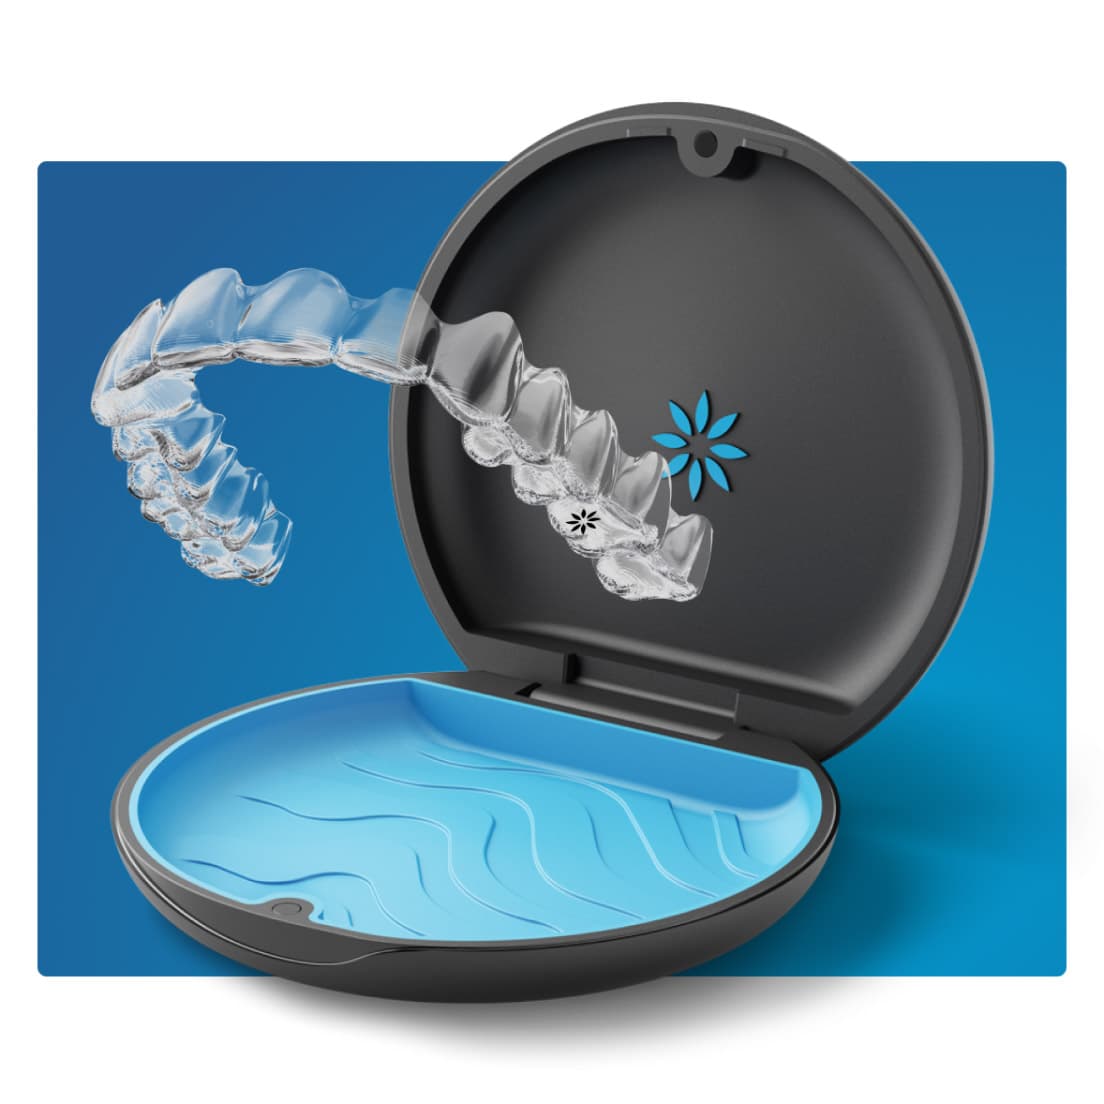 American Academy of Clear Aligners - Some Clear Aligner Systems utilize  attachments as part of the protocol and some do not. When a system (such as  Invisalign) uses attachments, are they truly